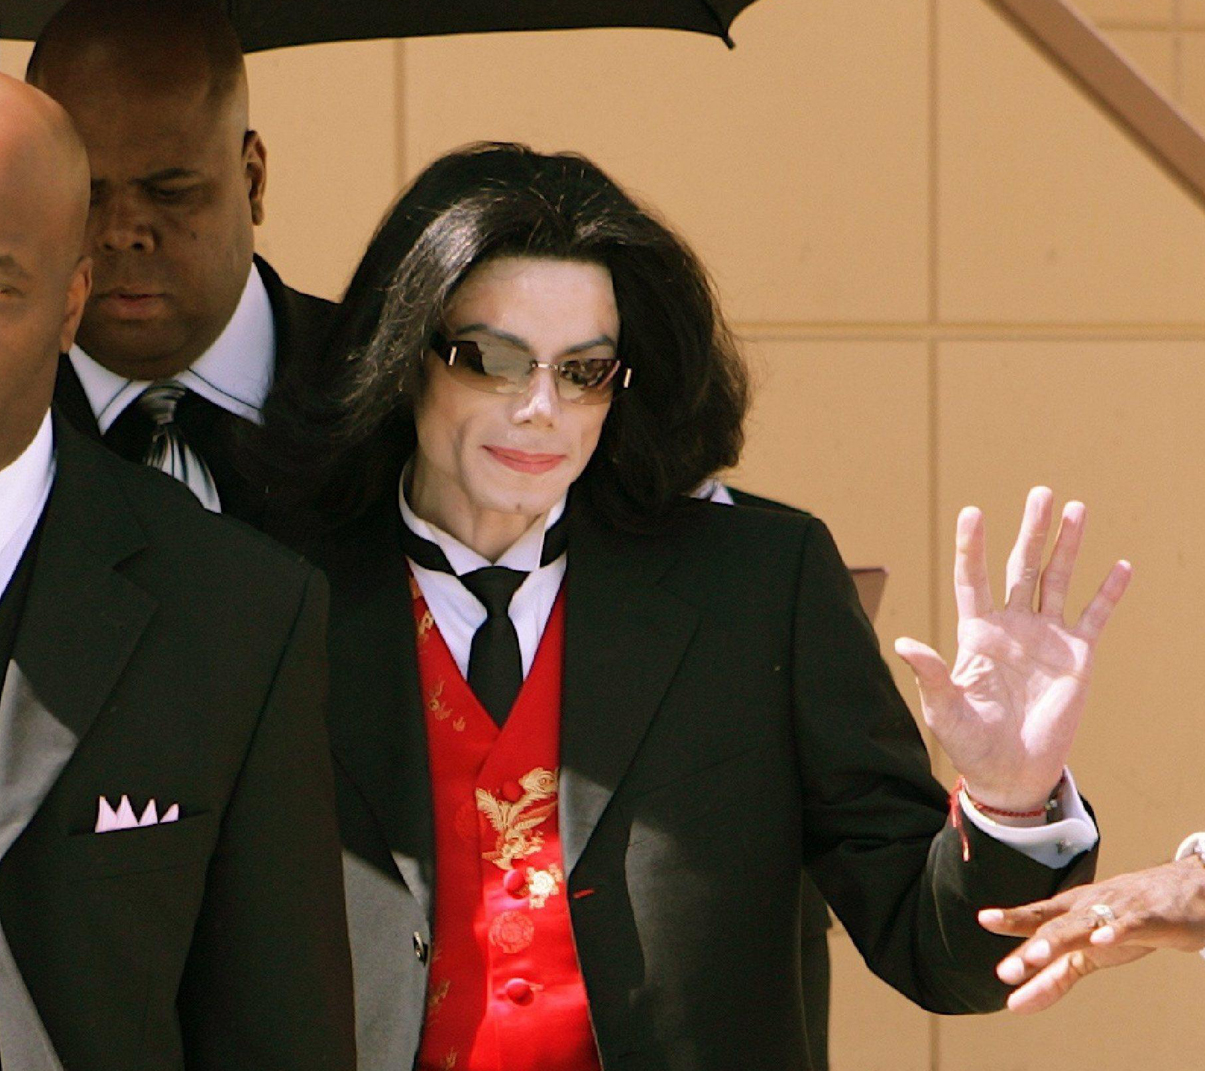 Michael Jackson most Startling Claims through the years